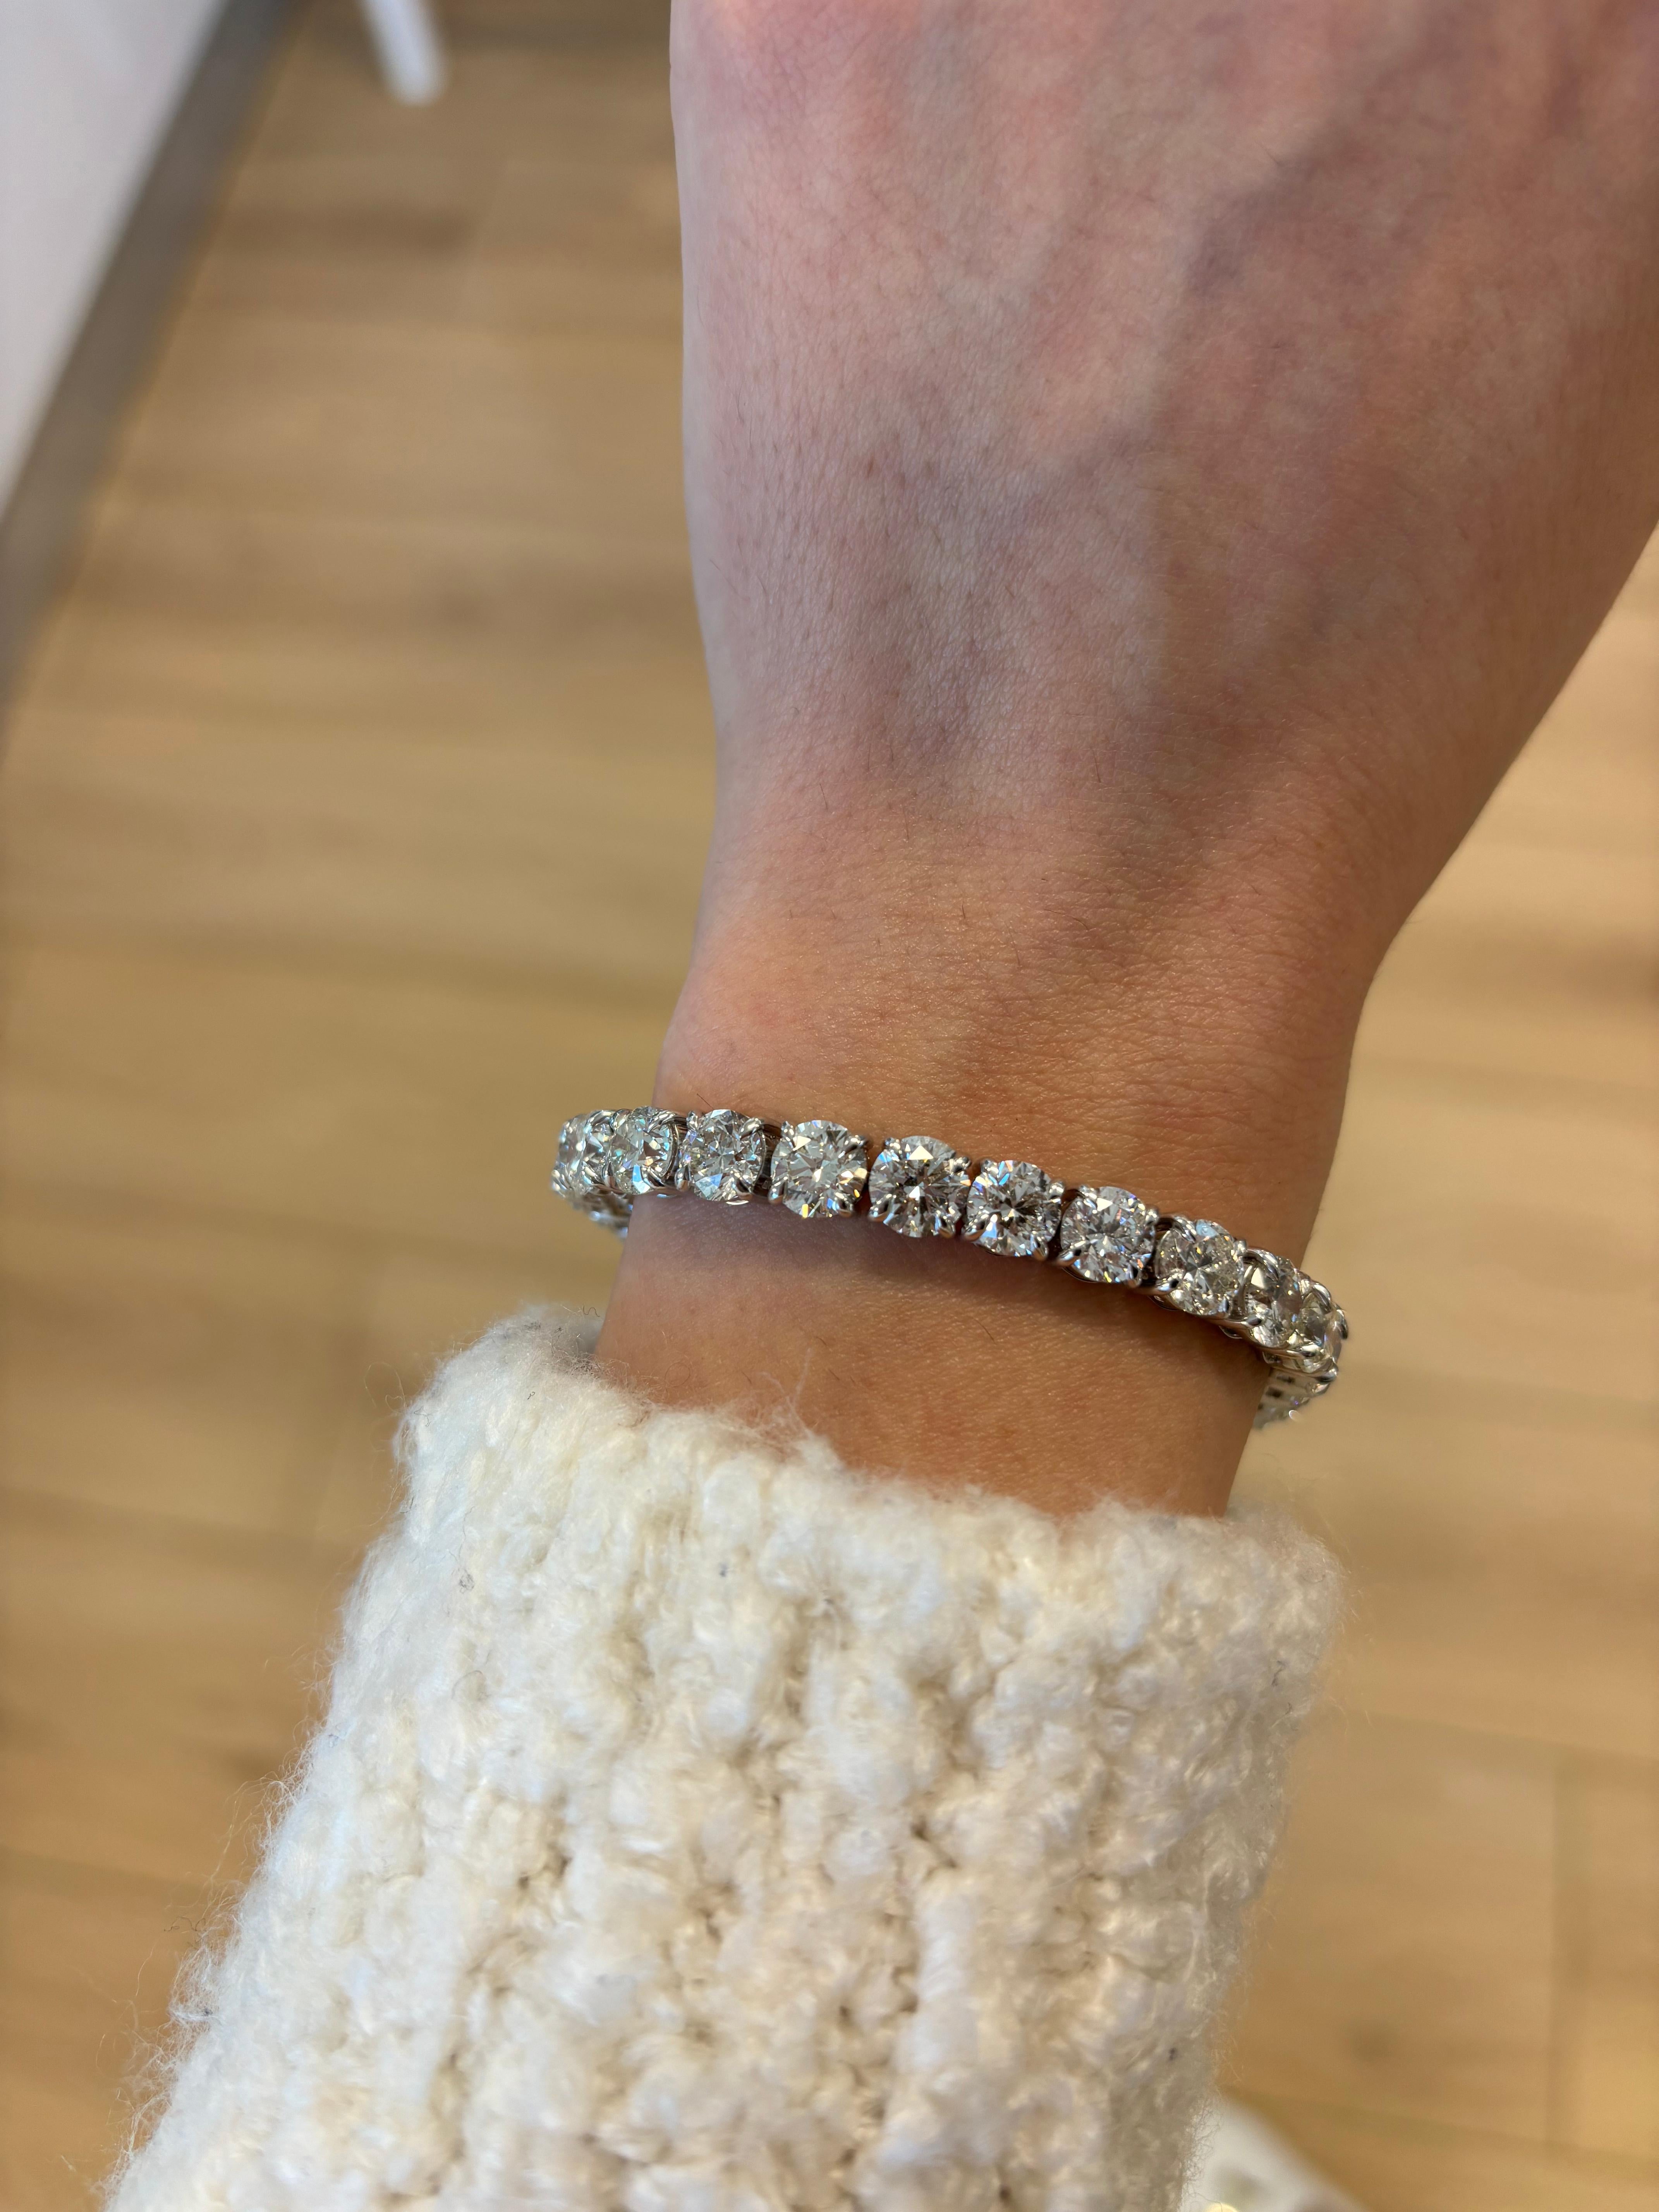 Exquisite and timeless diamonds tennis bracelet, by Alexander Beverly Hills.
28 round brilliant diamonds, 27.87 carats. Approximately H/I color and SI clarity. Four prong set in 18k white gold, 24.92 grams, 7 inches. 
Accommodated with an up-to-date